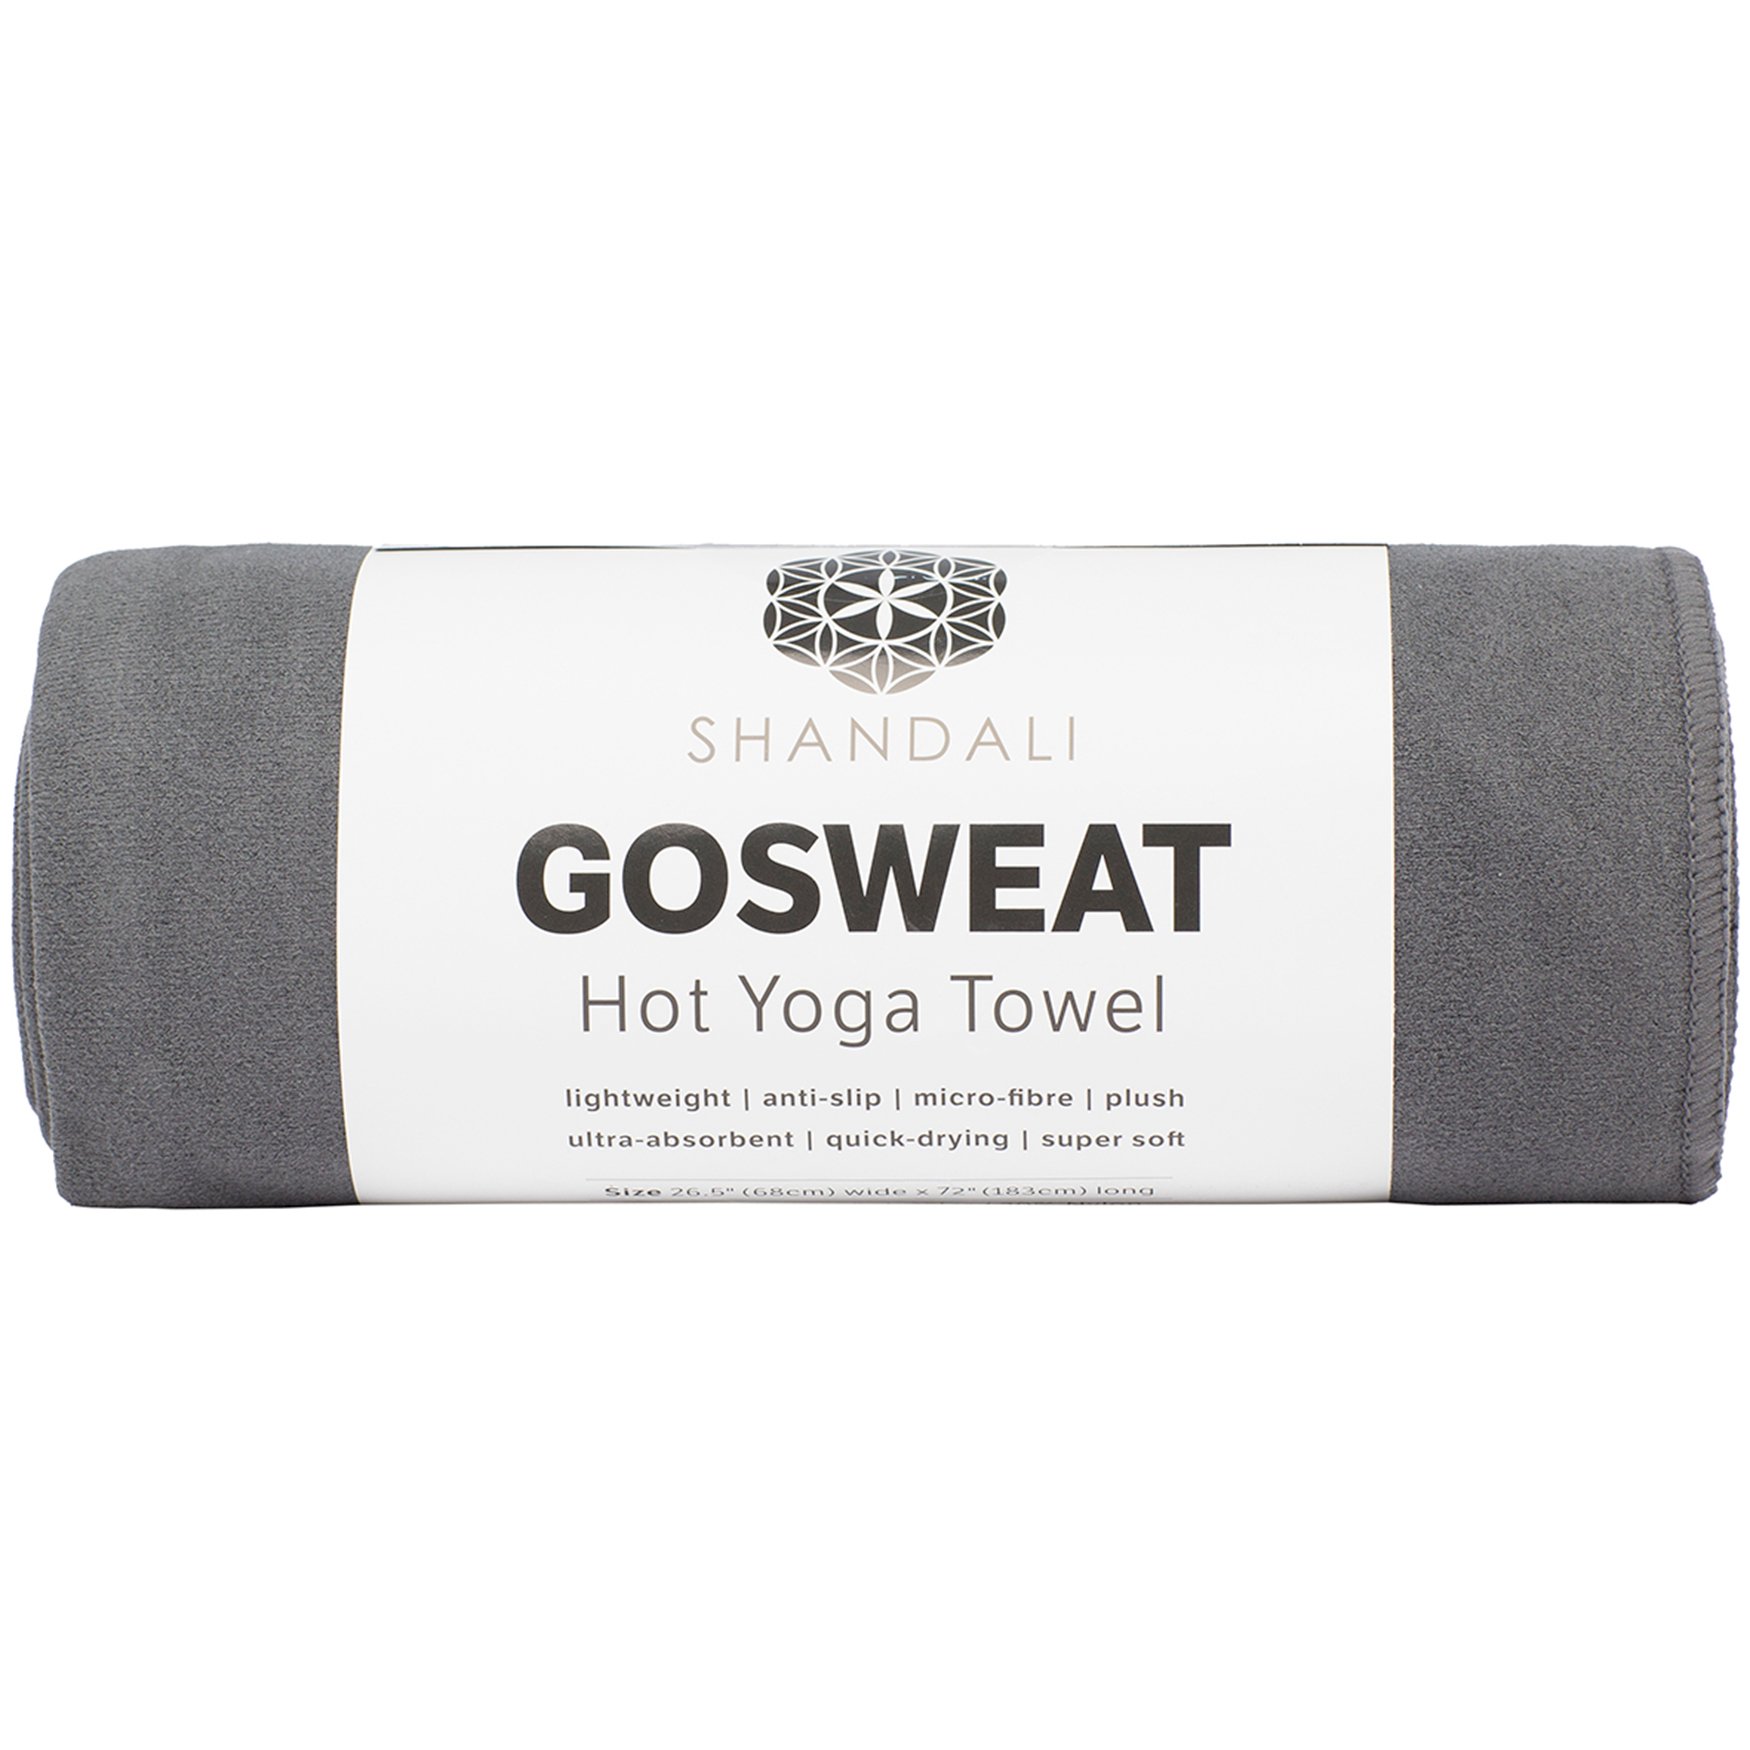 GoSweat Non-Slip Hot Yoga Towel by Shandali with Super-Absorbent